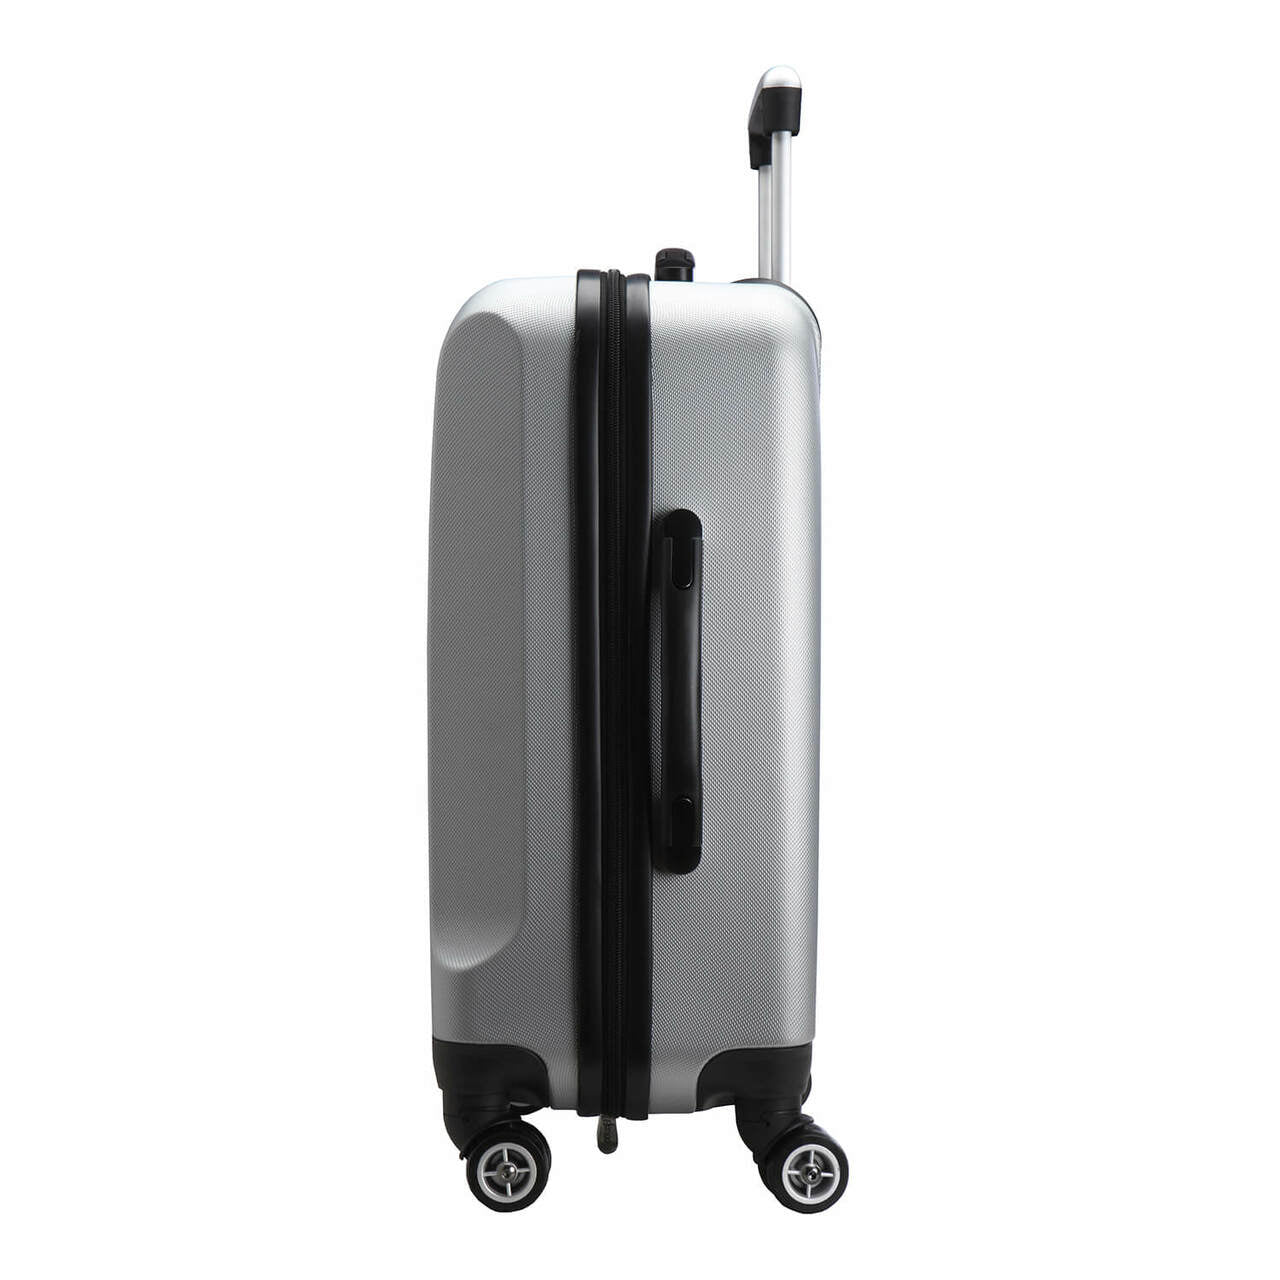 Boston Bruins 20" Silver Domestic Carry-on Spinner